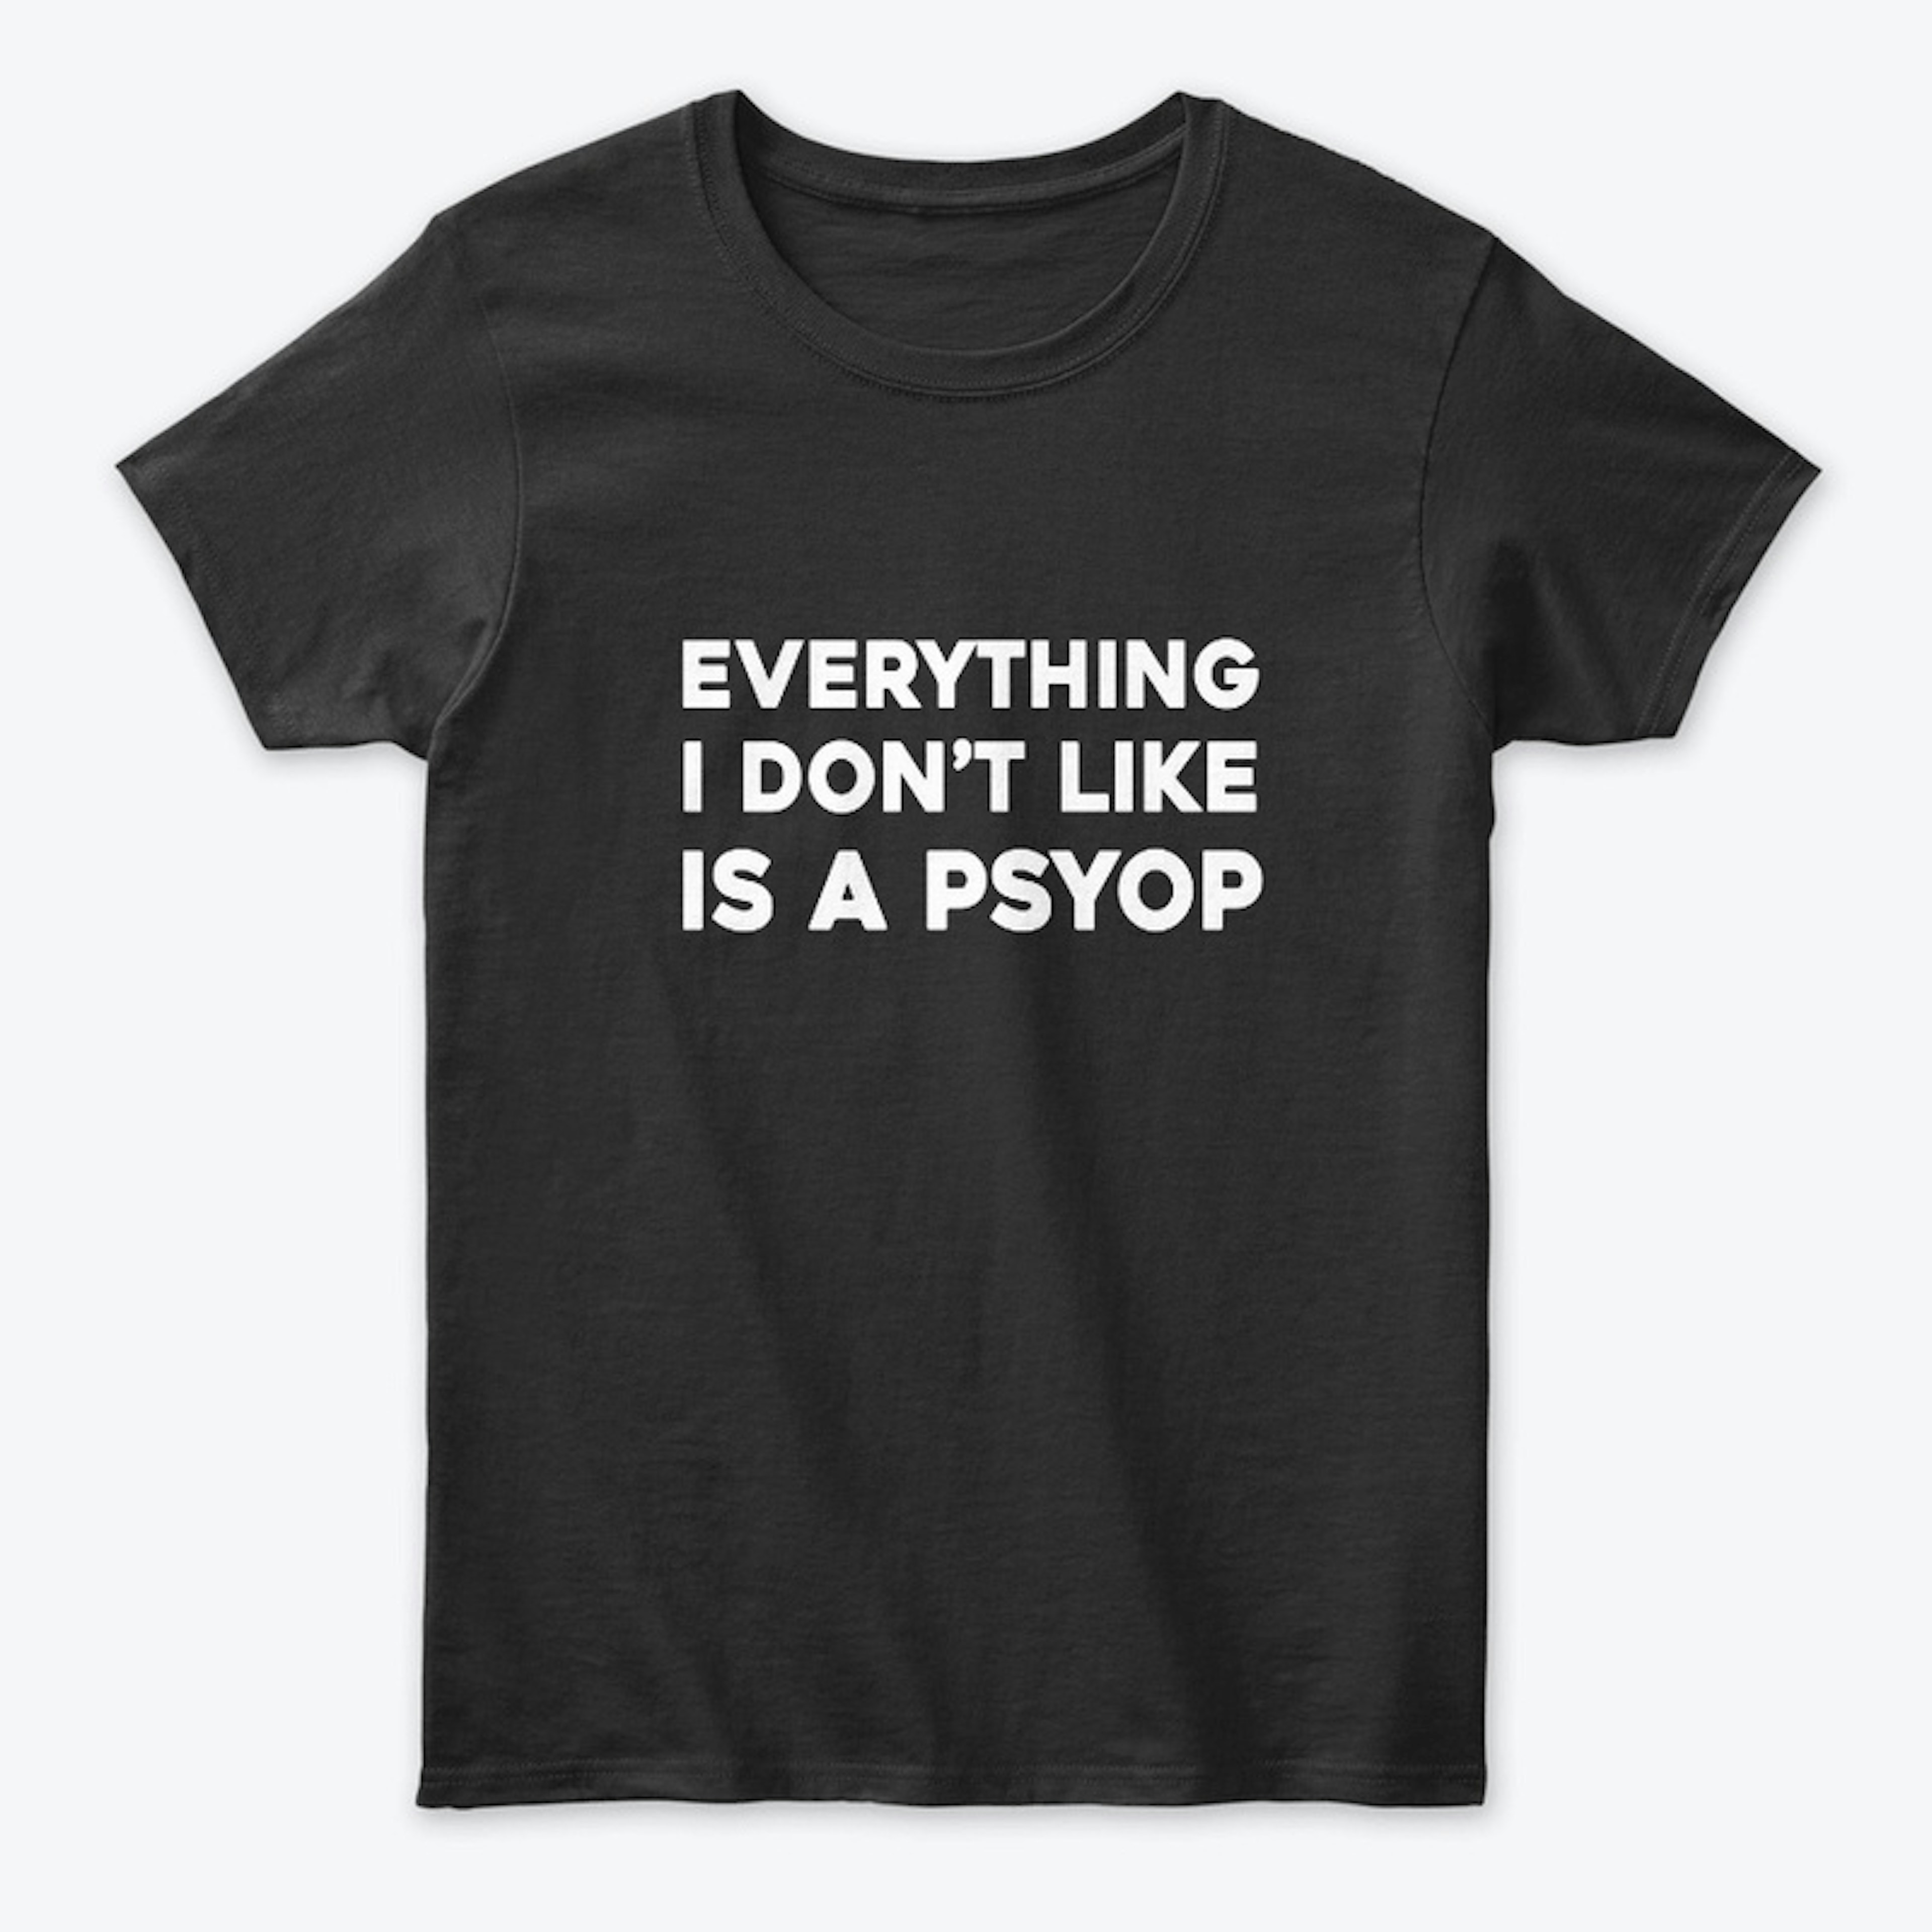 Everything I don’t like is a psyop